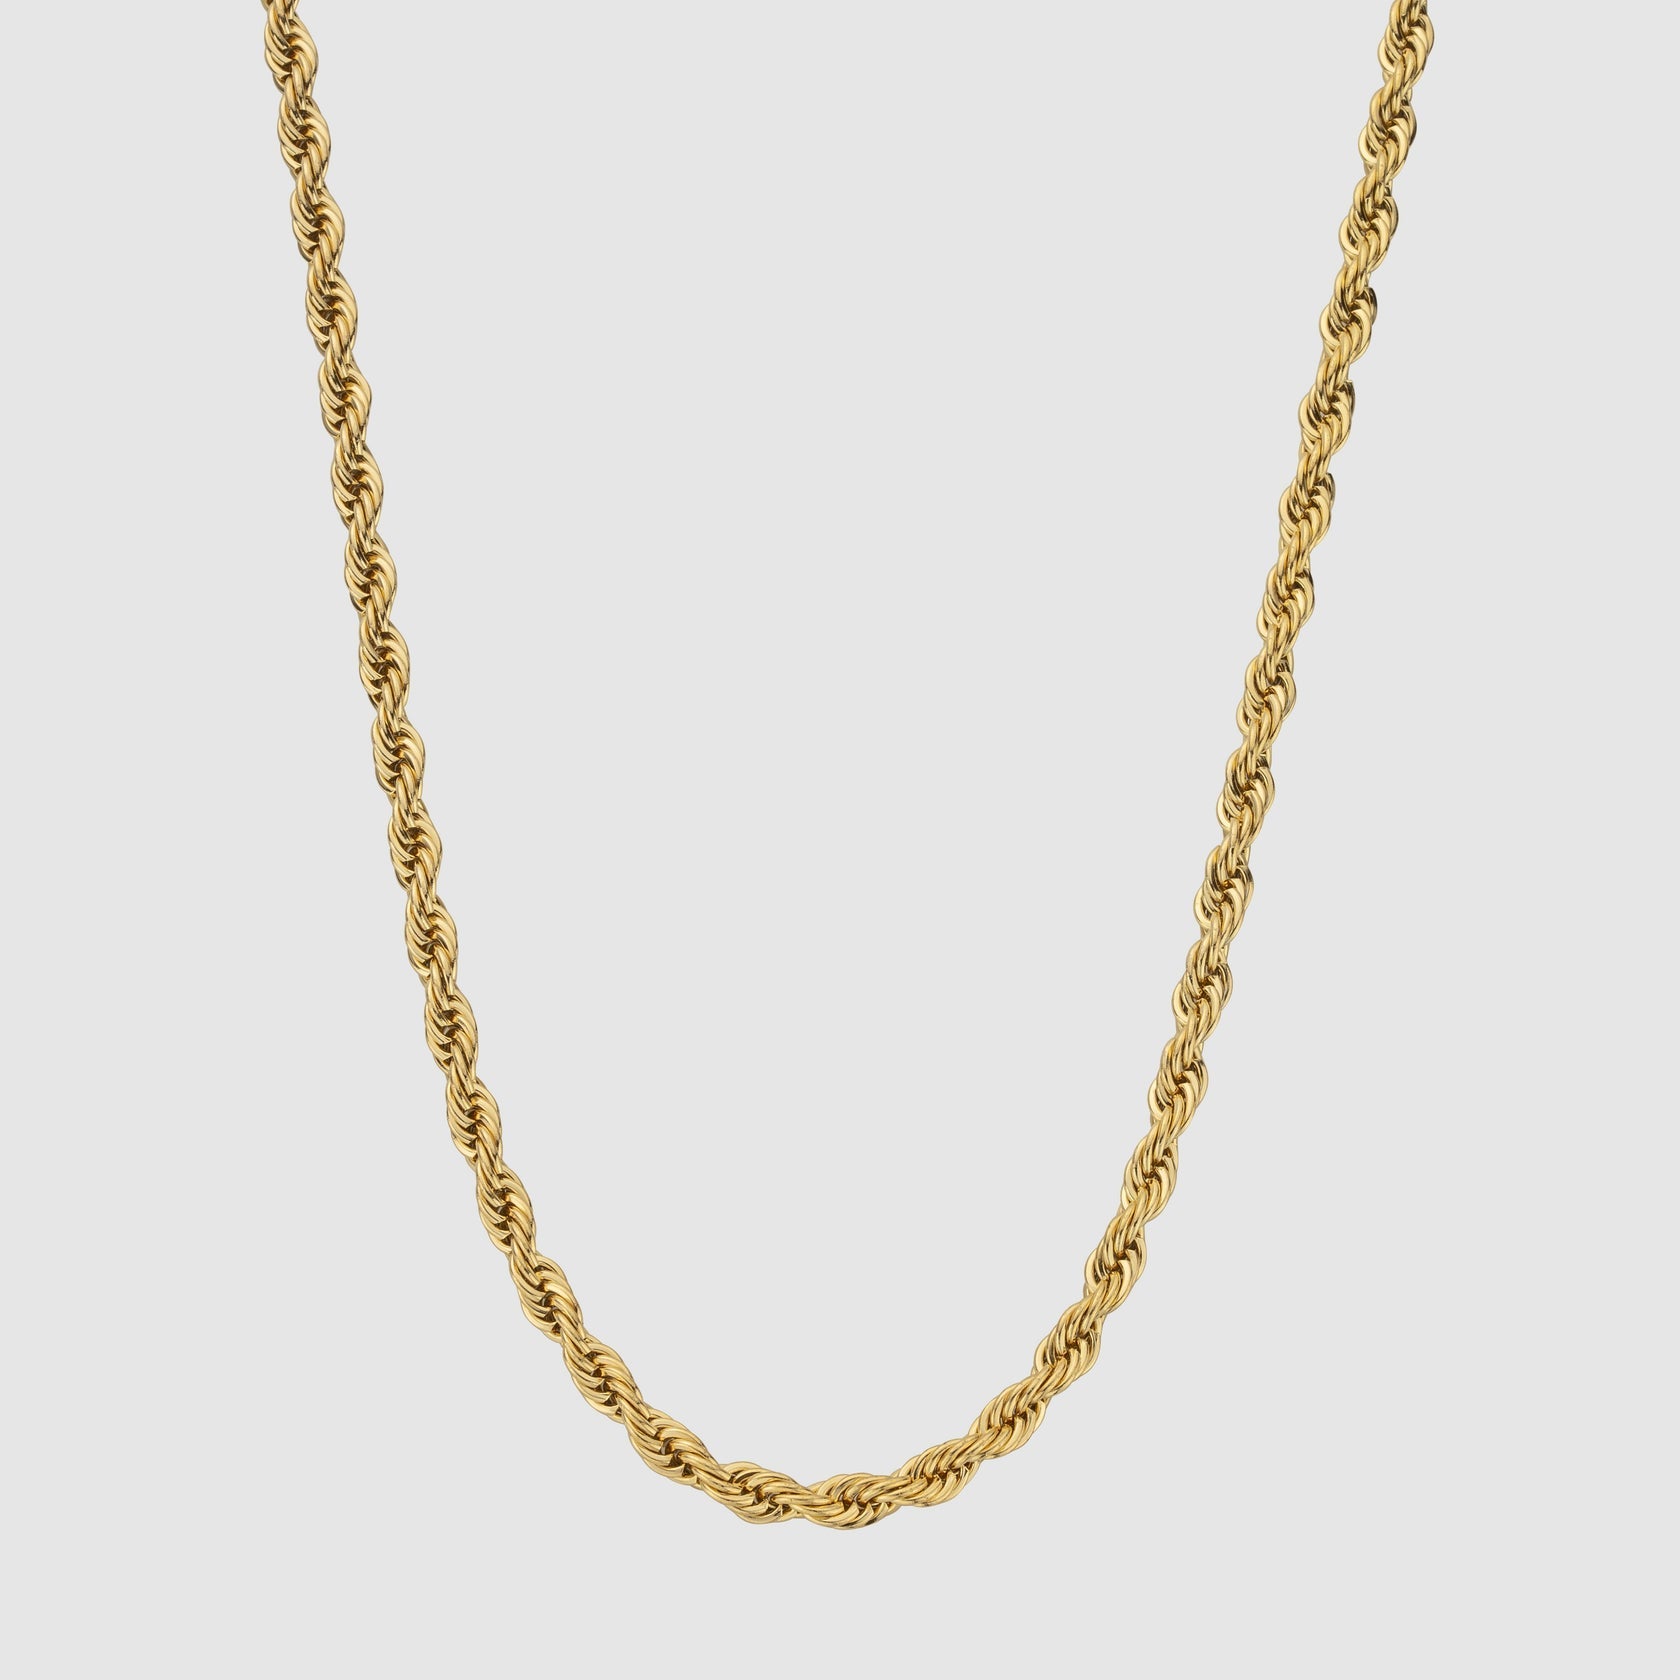 Rope Chain 5mm (Gold)